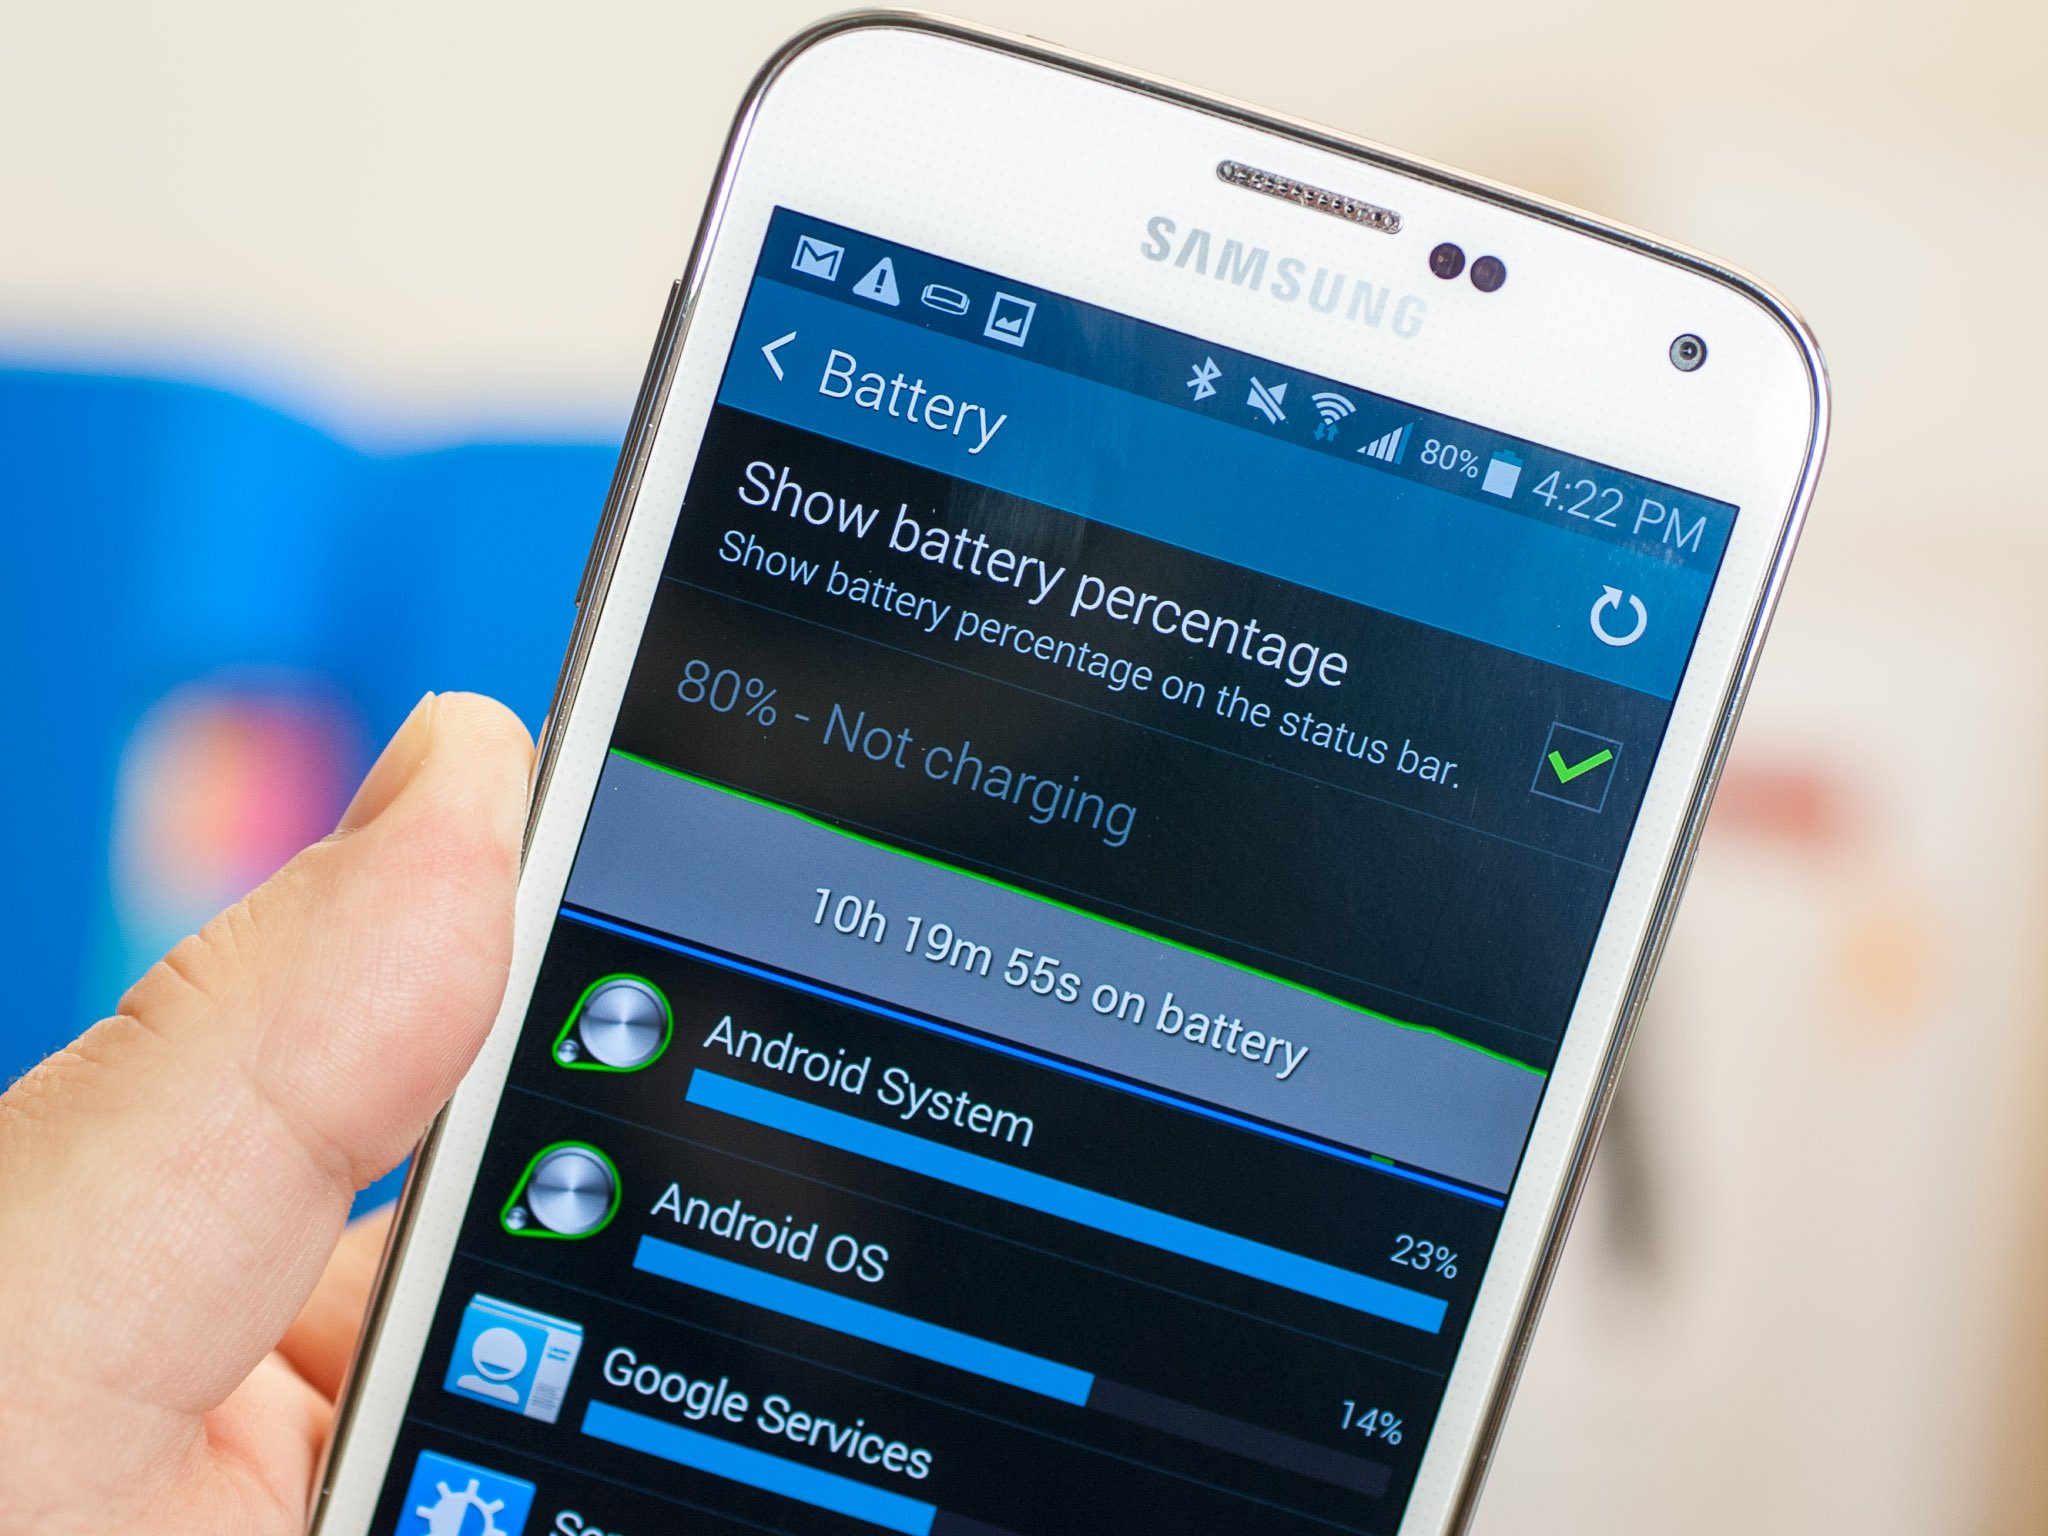 Top Tips For Saving Battery Life On The Samsung Galaxy S5